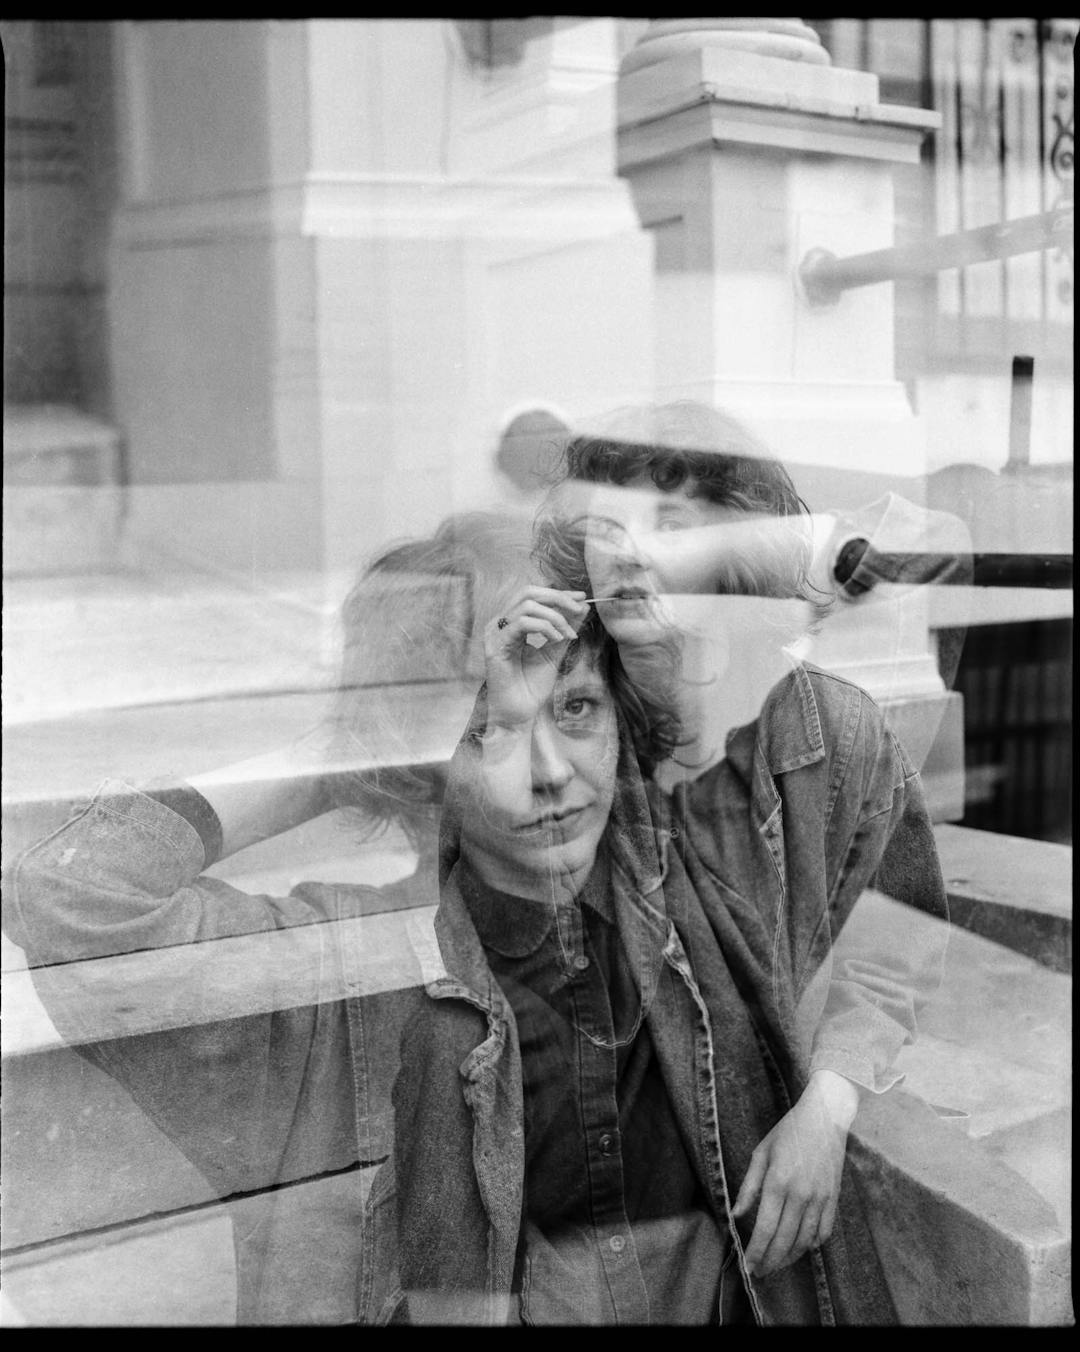 black and white medium format double exposure of woman sitting outside on steps